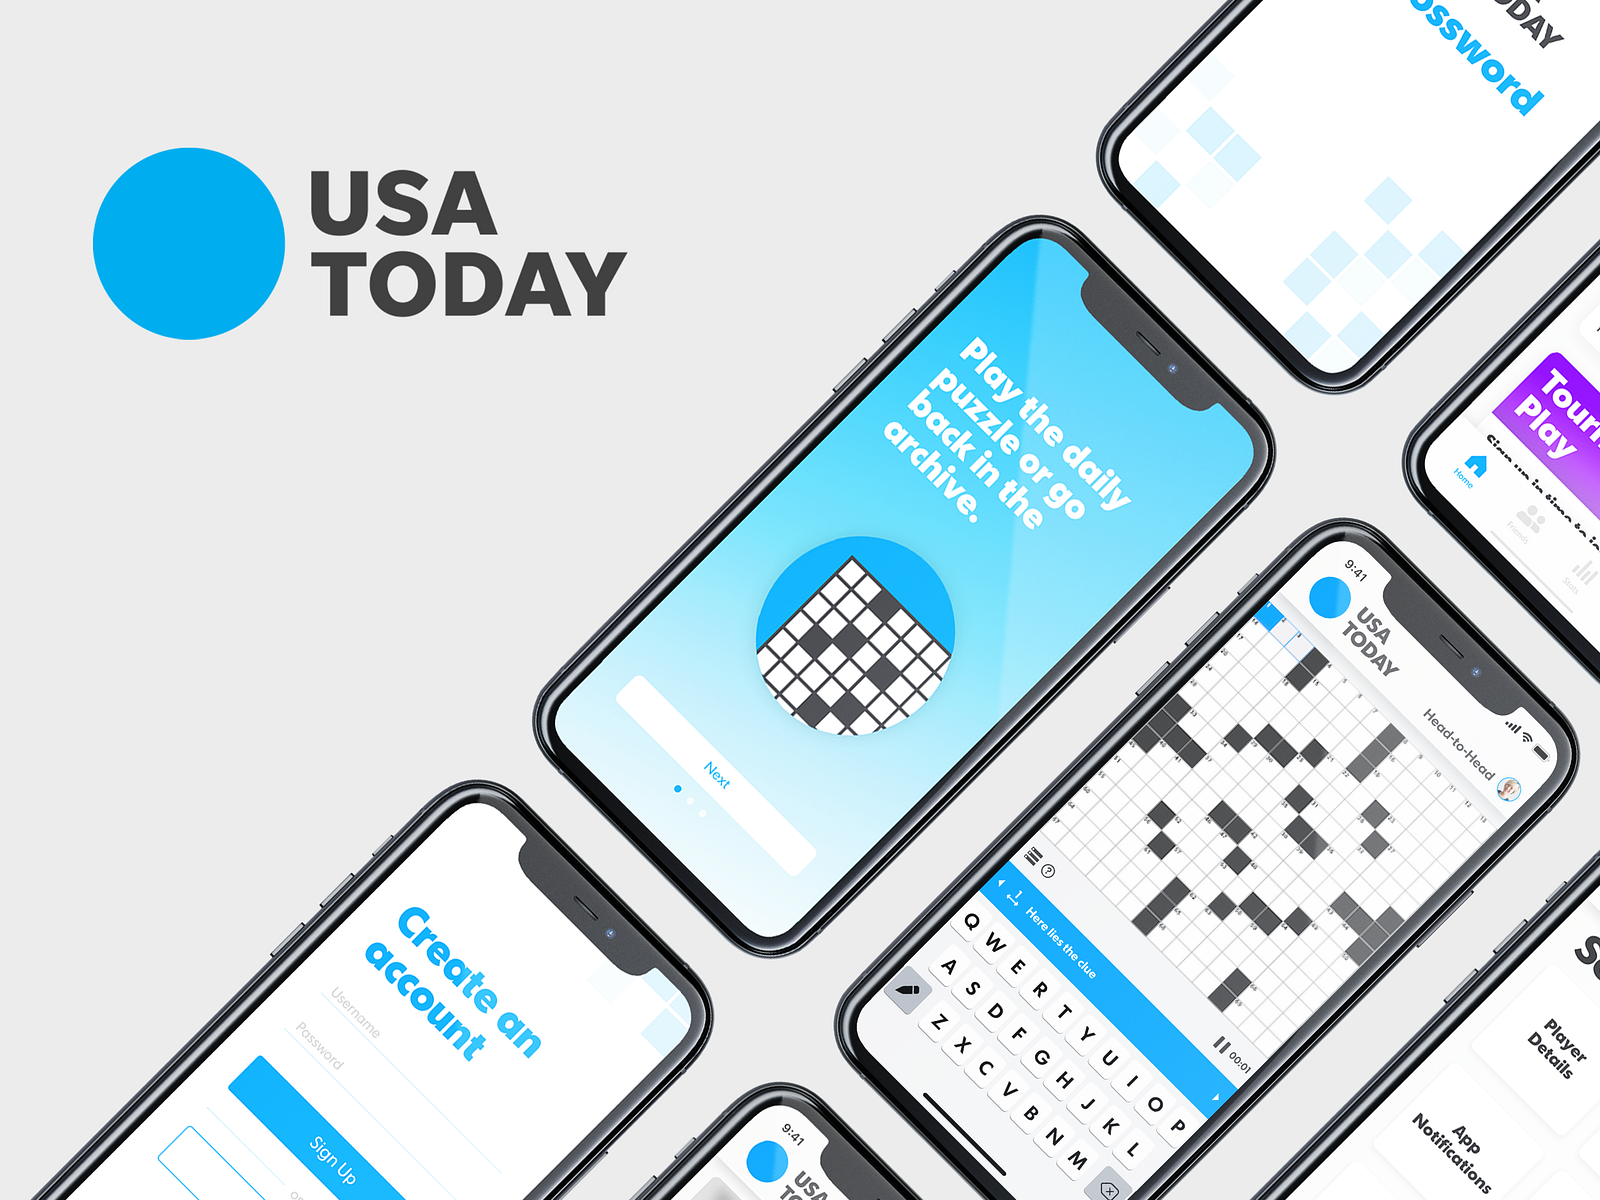 usa-today-crossword-app-an-exploration-by-spencer-williams-on-dribbble